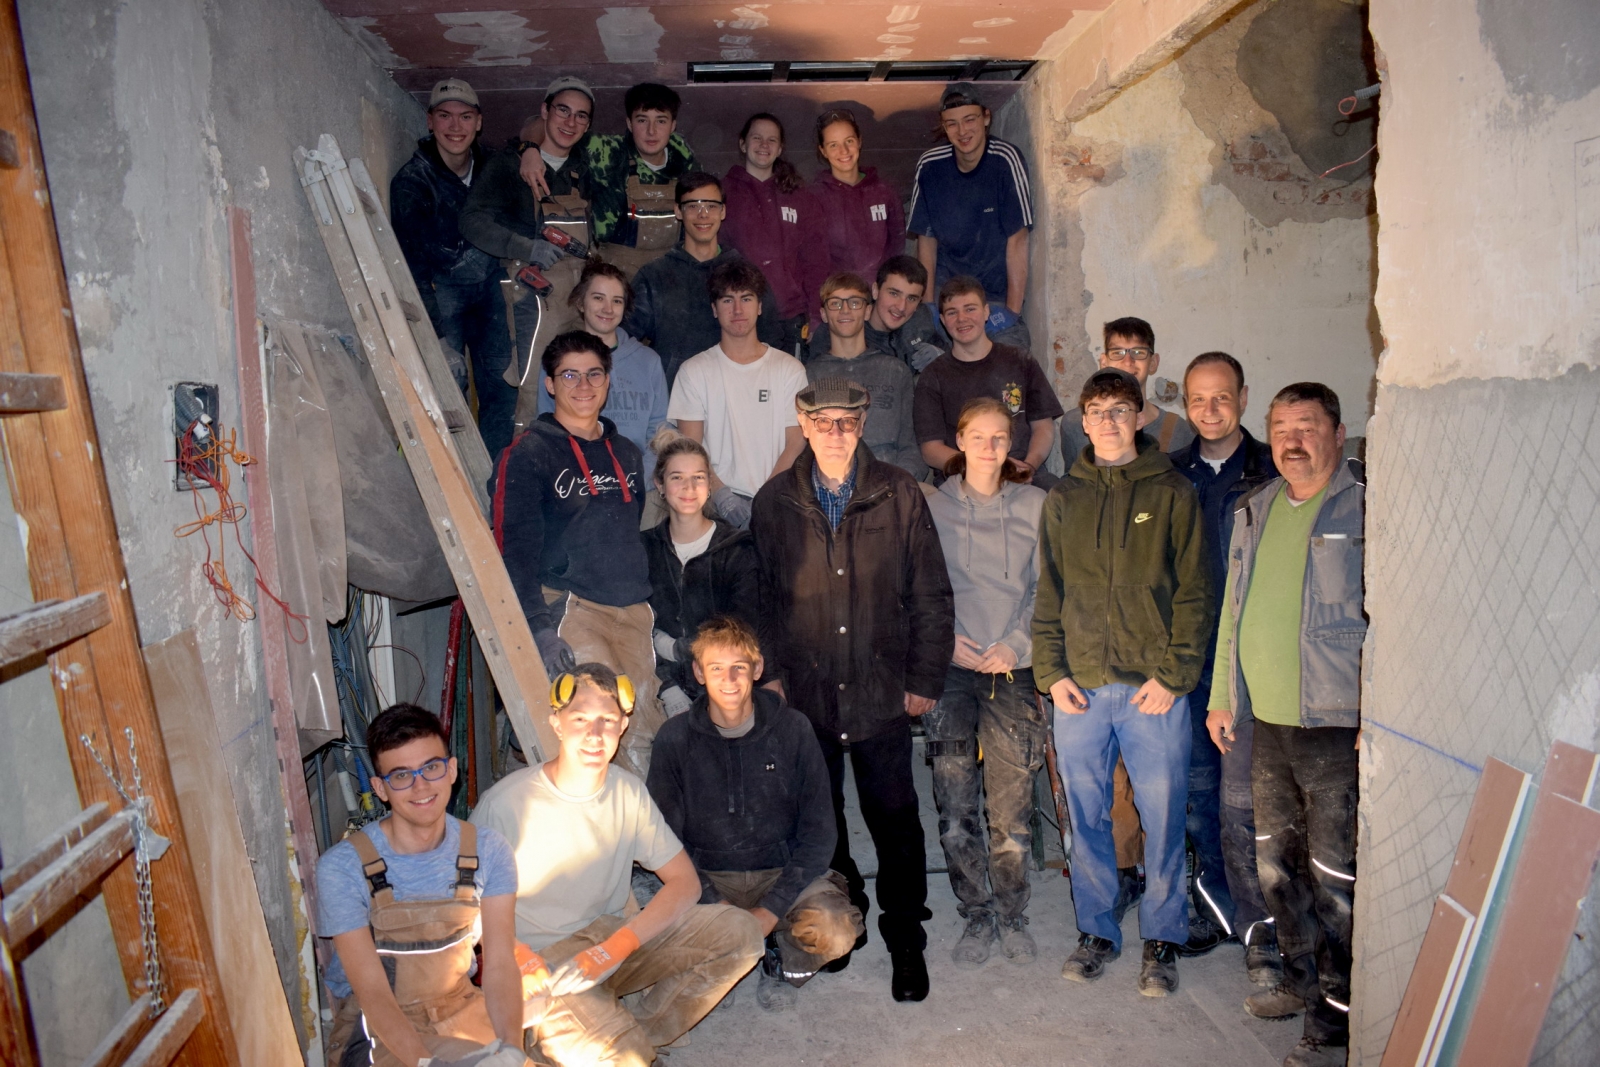 A new group of Austrian highschoolers volunteered at the renovation of St. Joseph